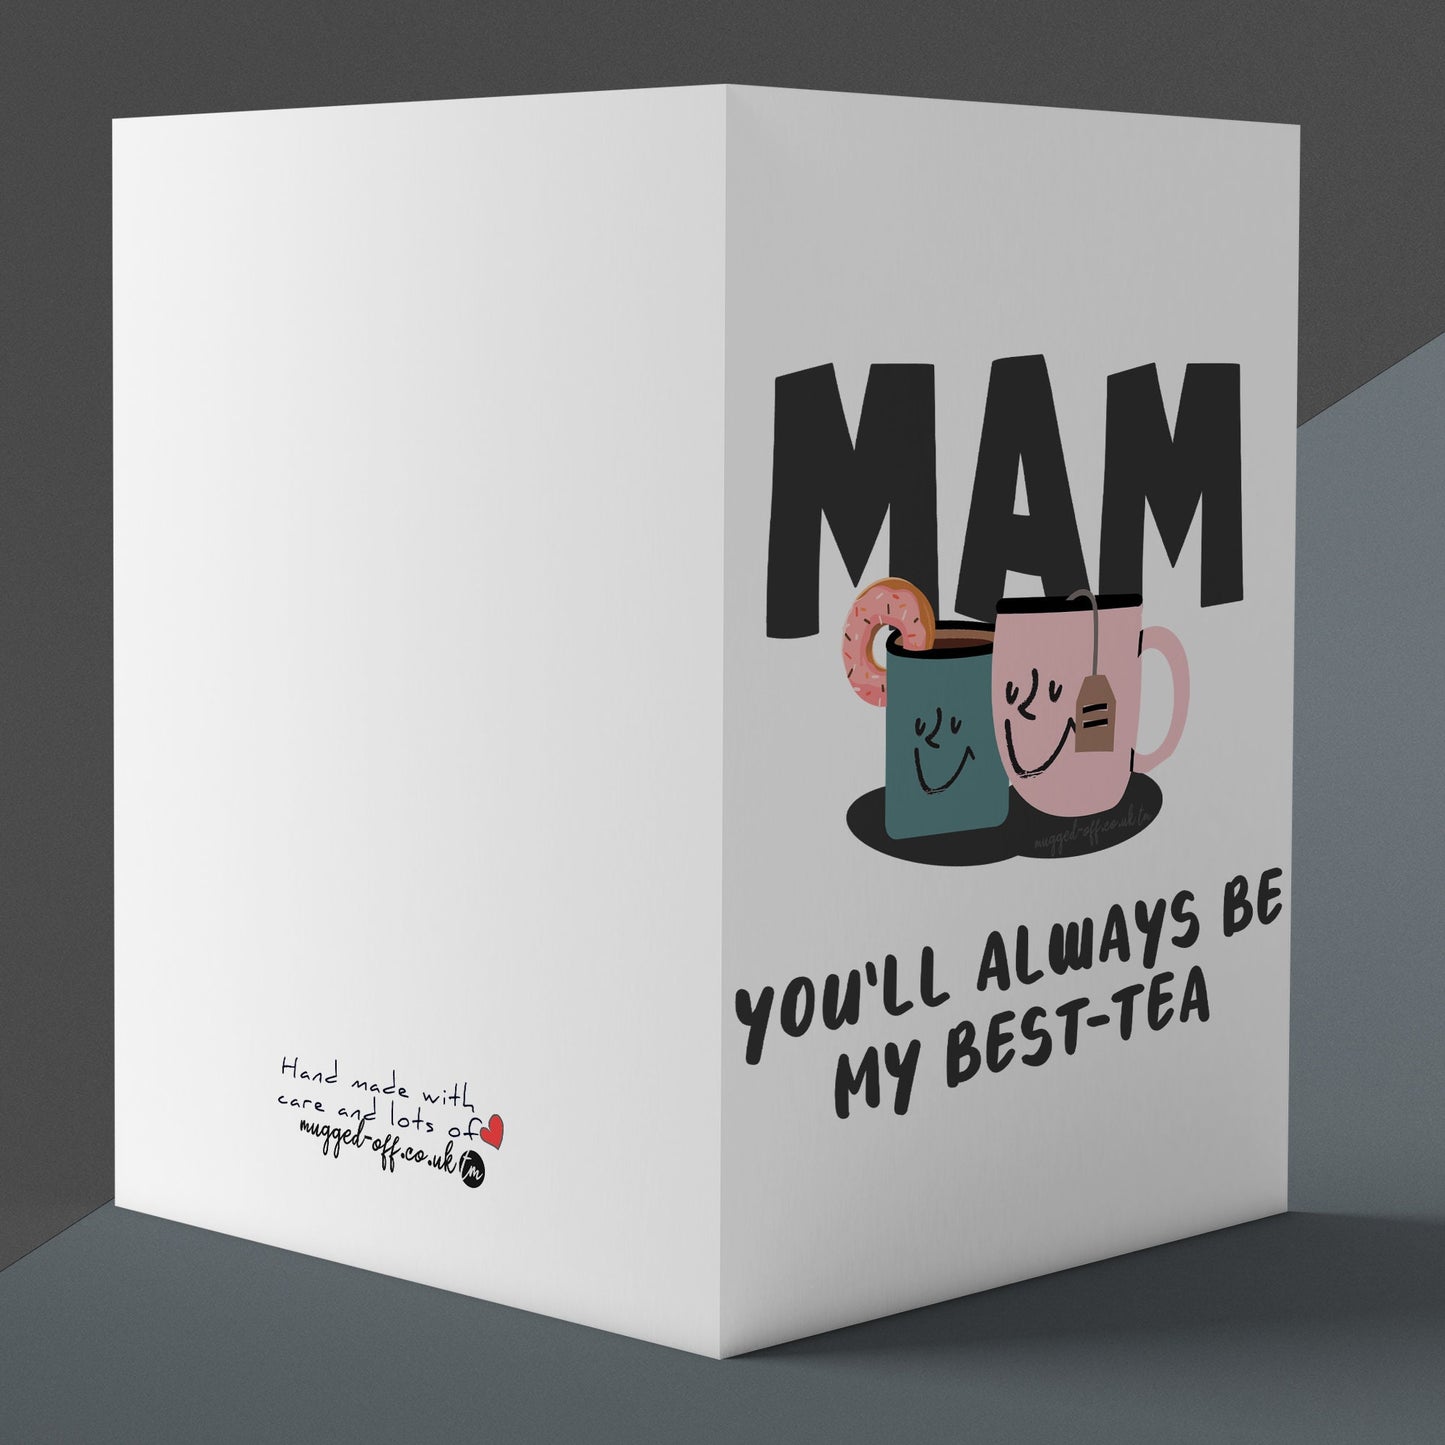 Mam Birthday Card, Funny Mam Birthday Card, From Son, Daughter, Funny Best Mother Card, Mam You'll Always Be My Best-tea Card mothers day card